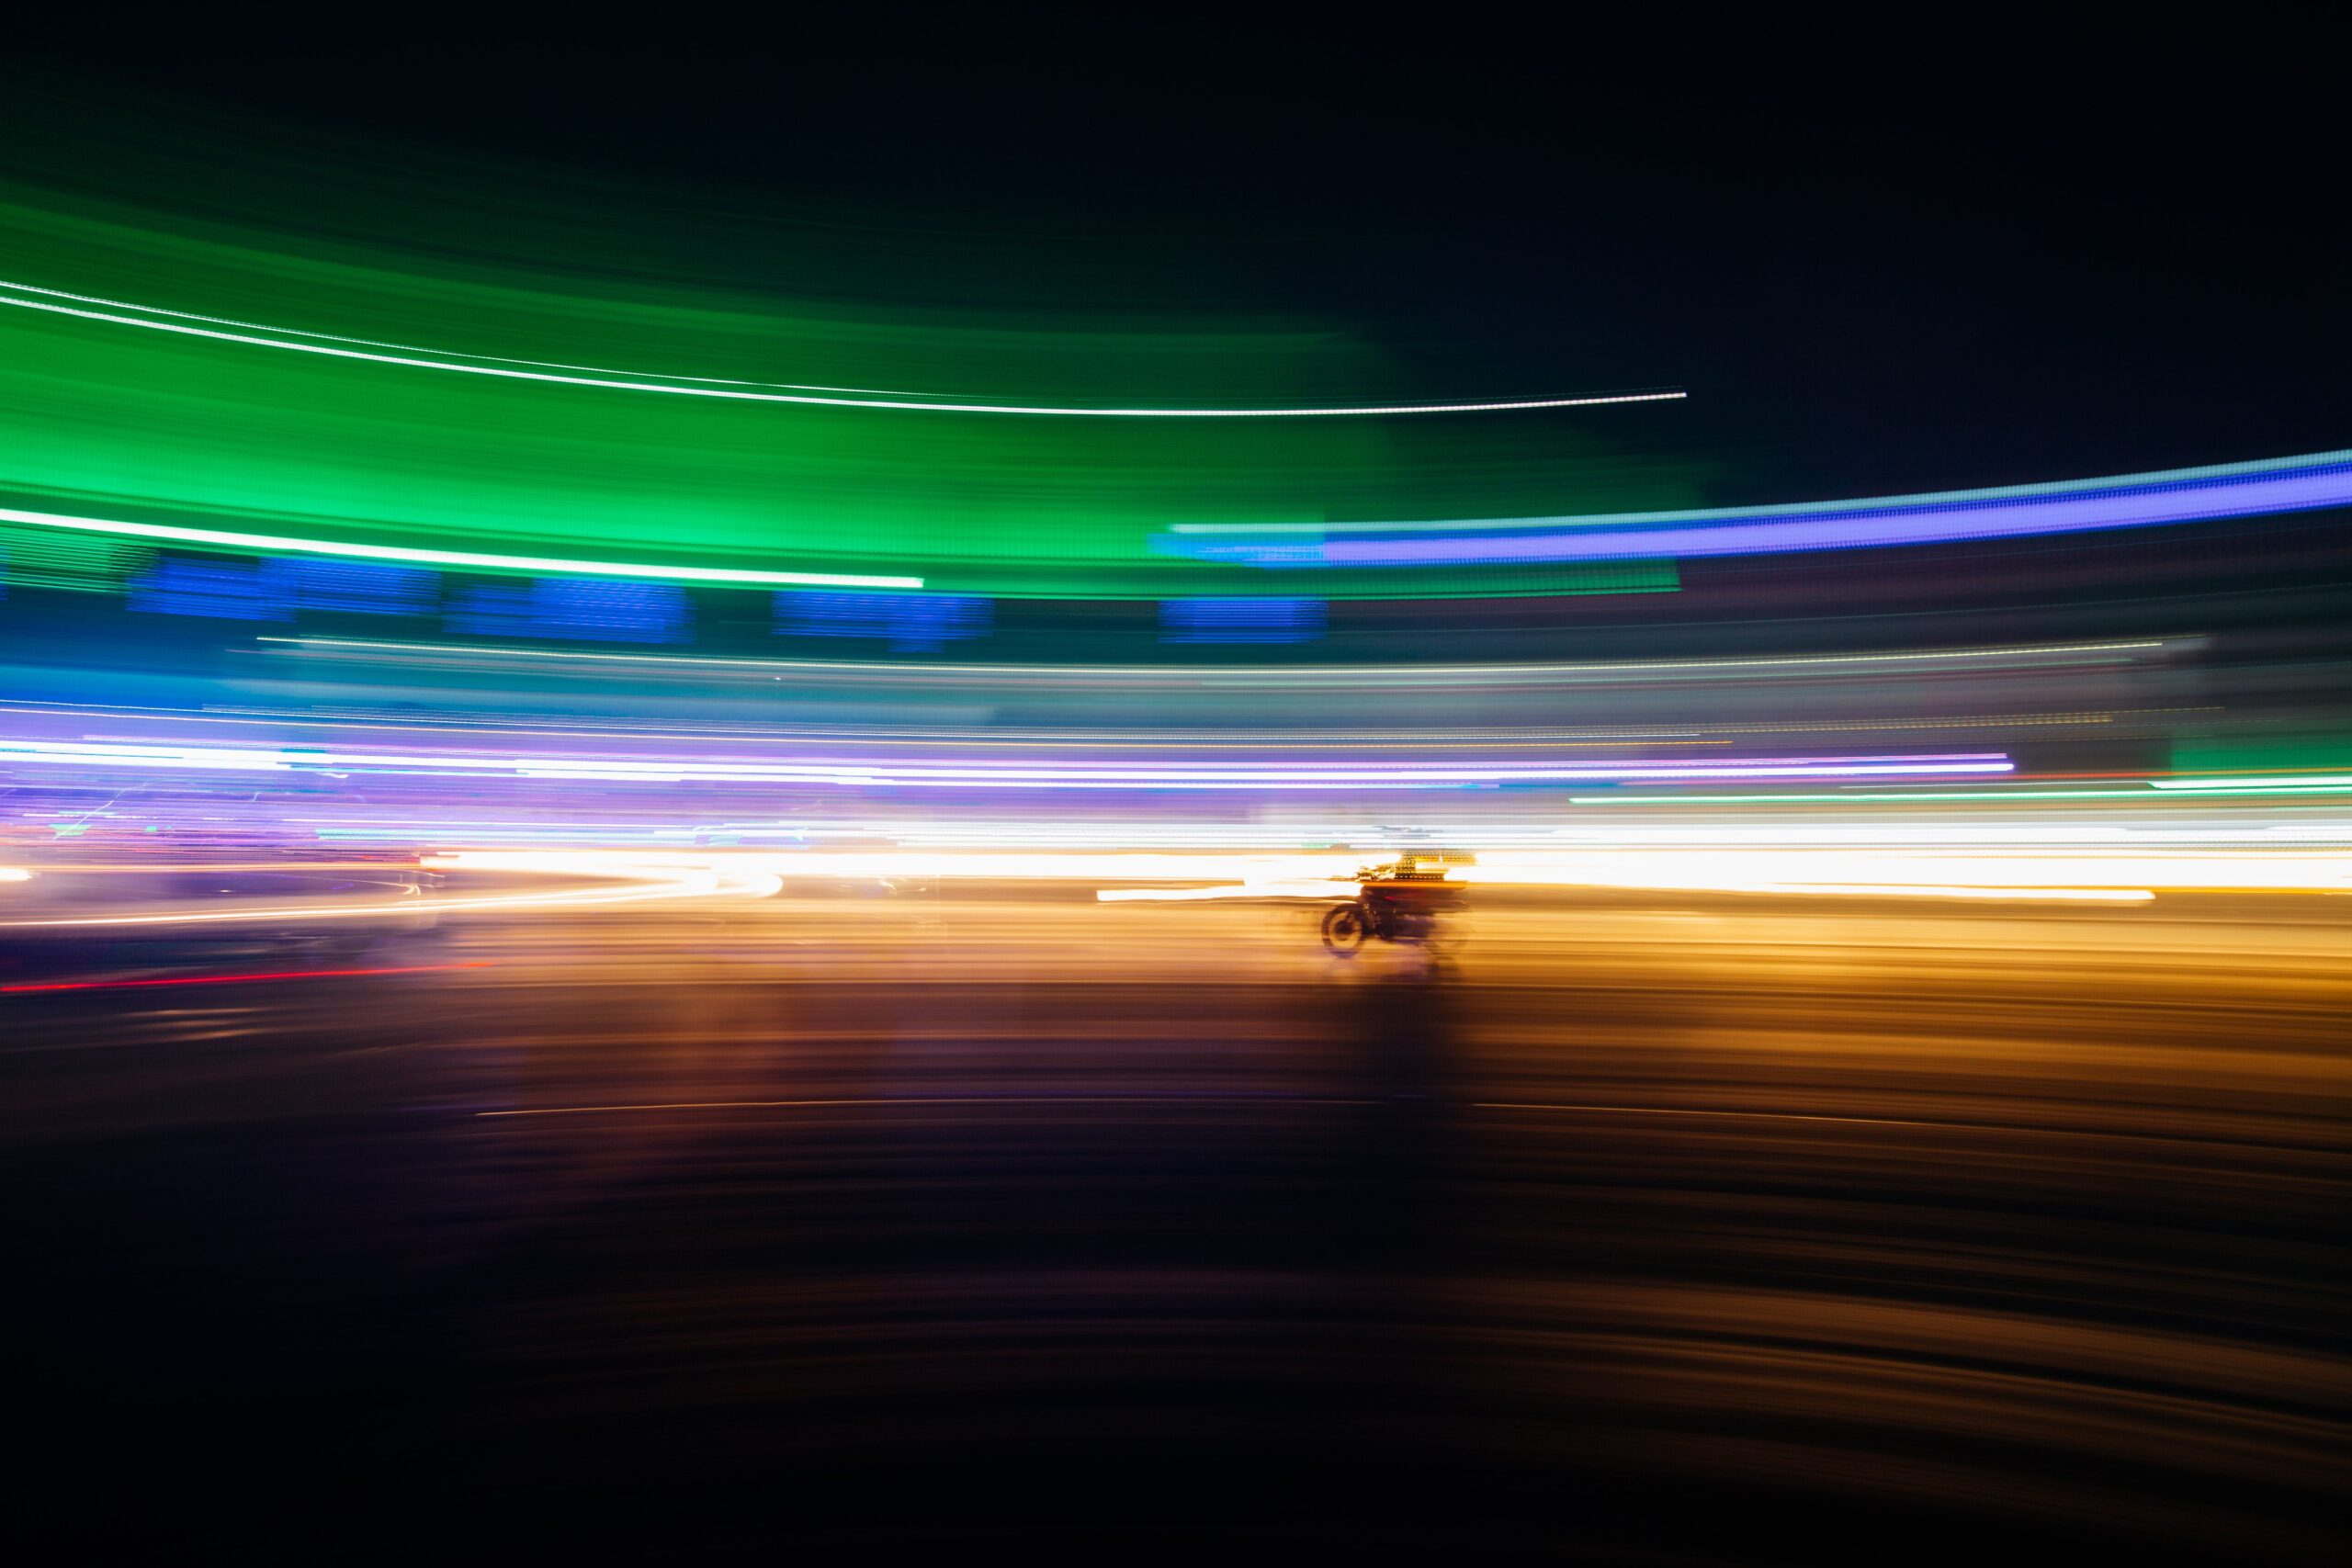 Time lapse picture of a motorbike against bright neon light trails.